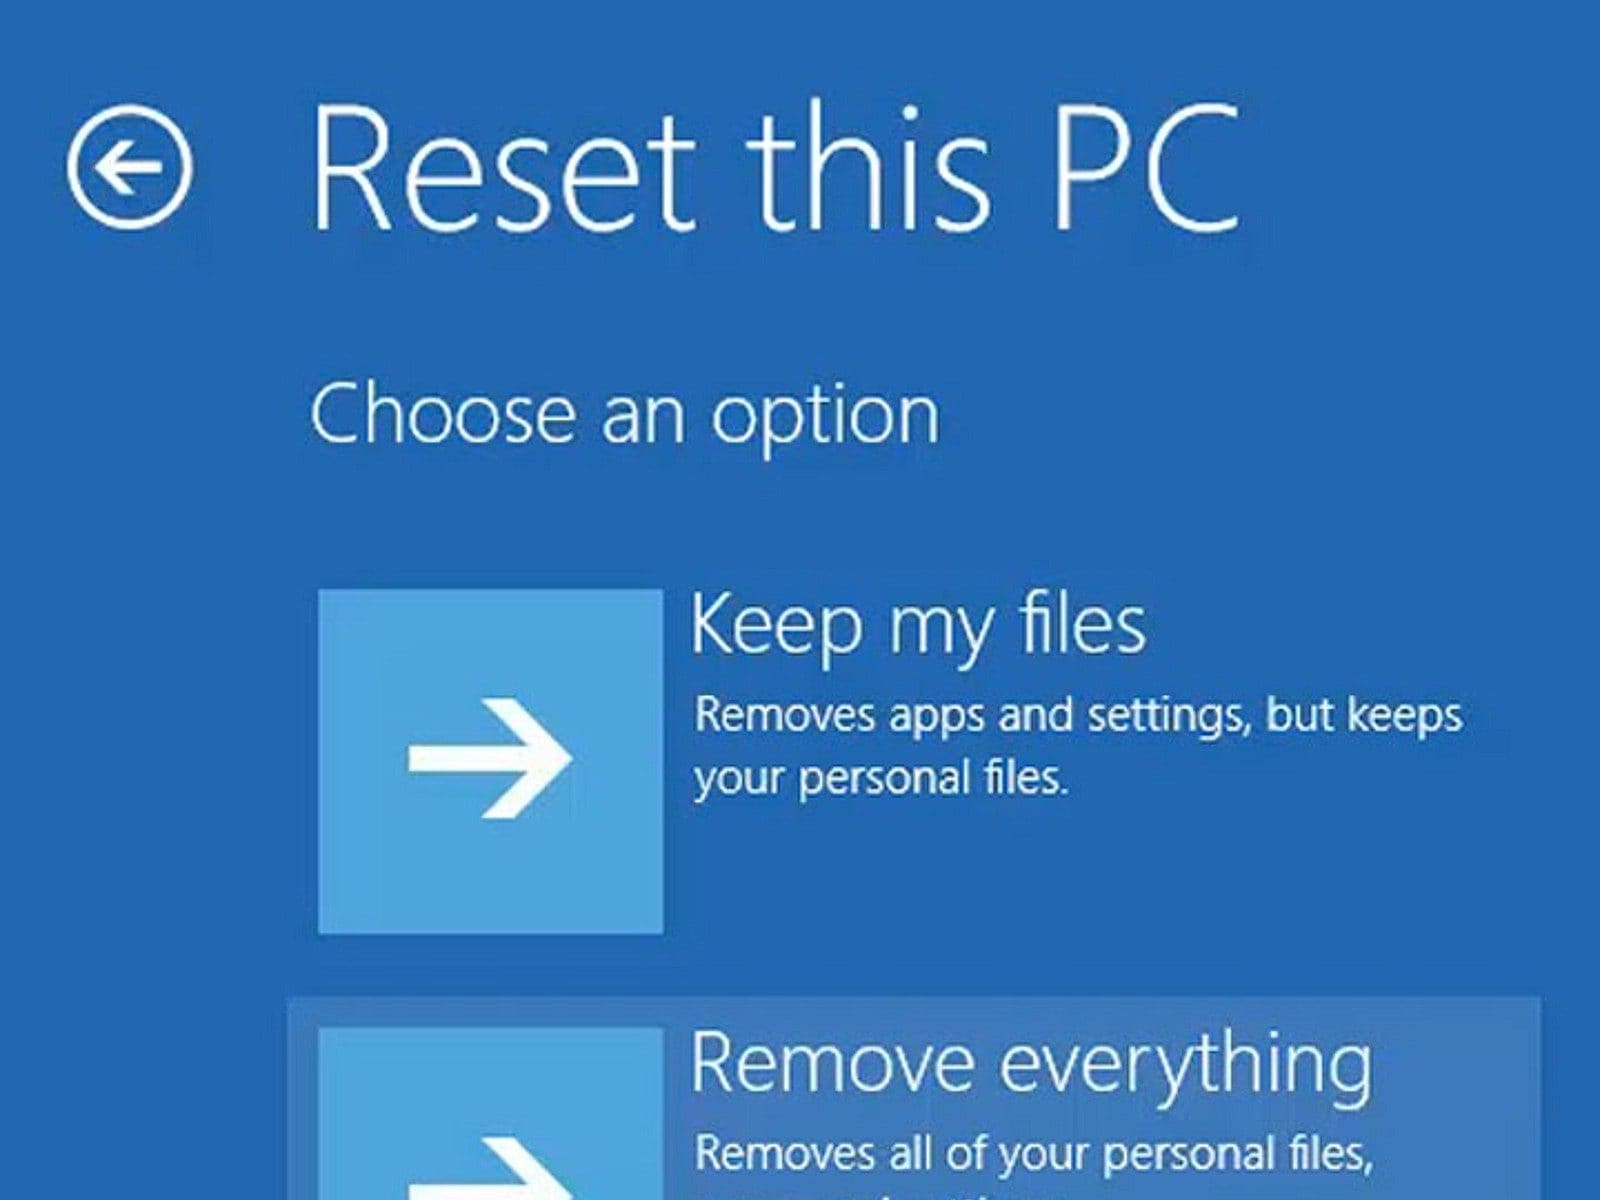 Laptop or Desktop Not Working Well? How to Factory Reset Your